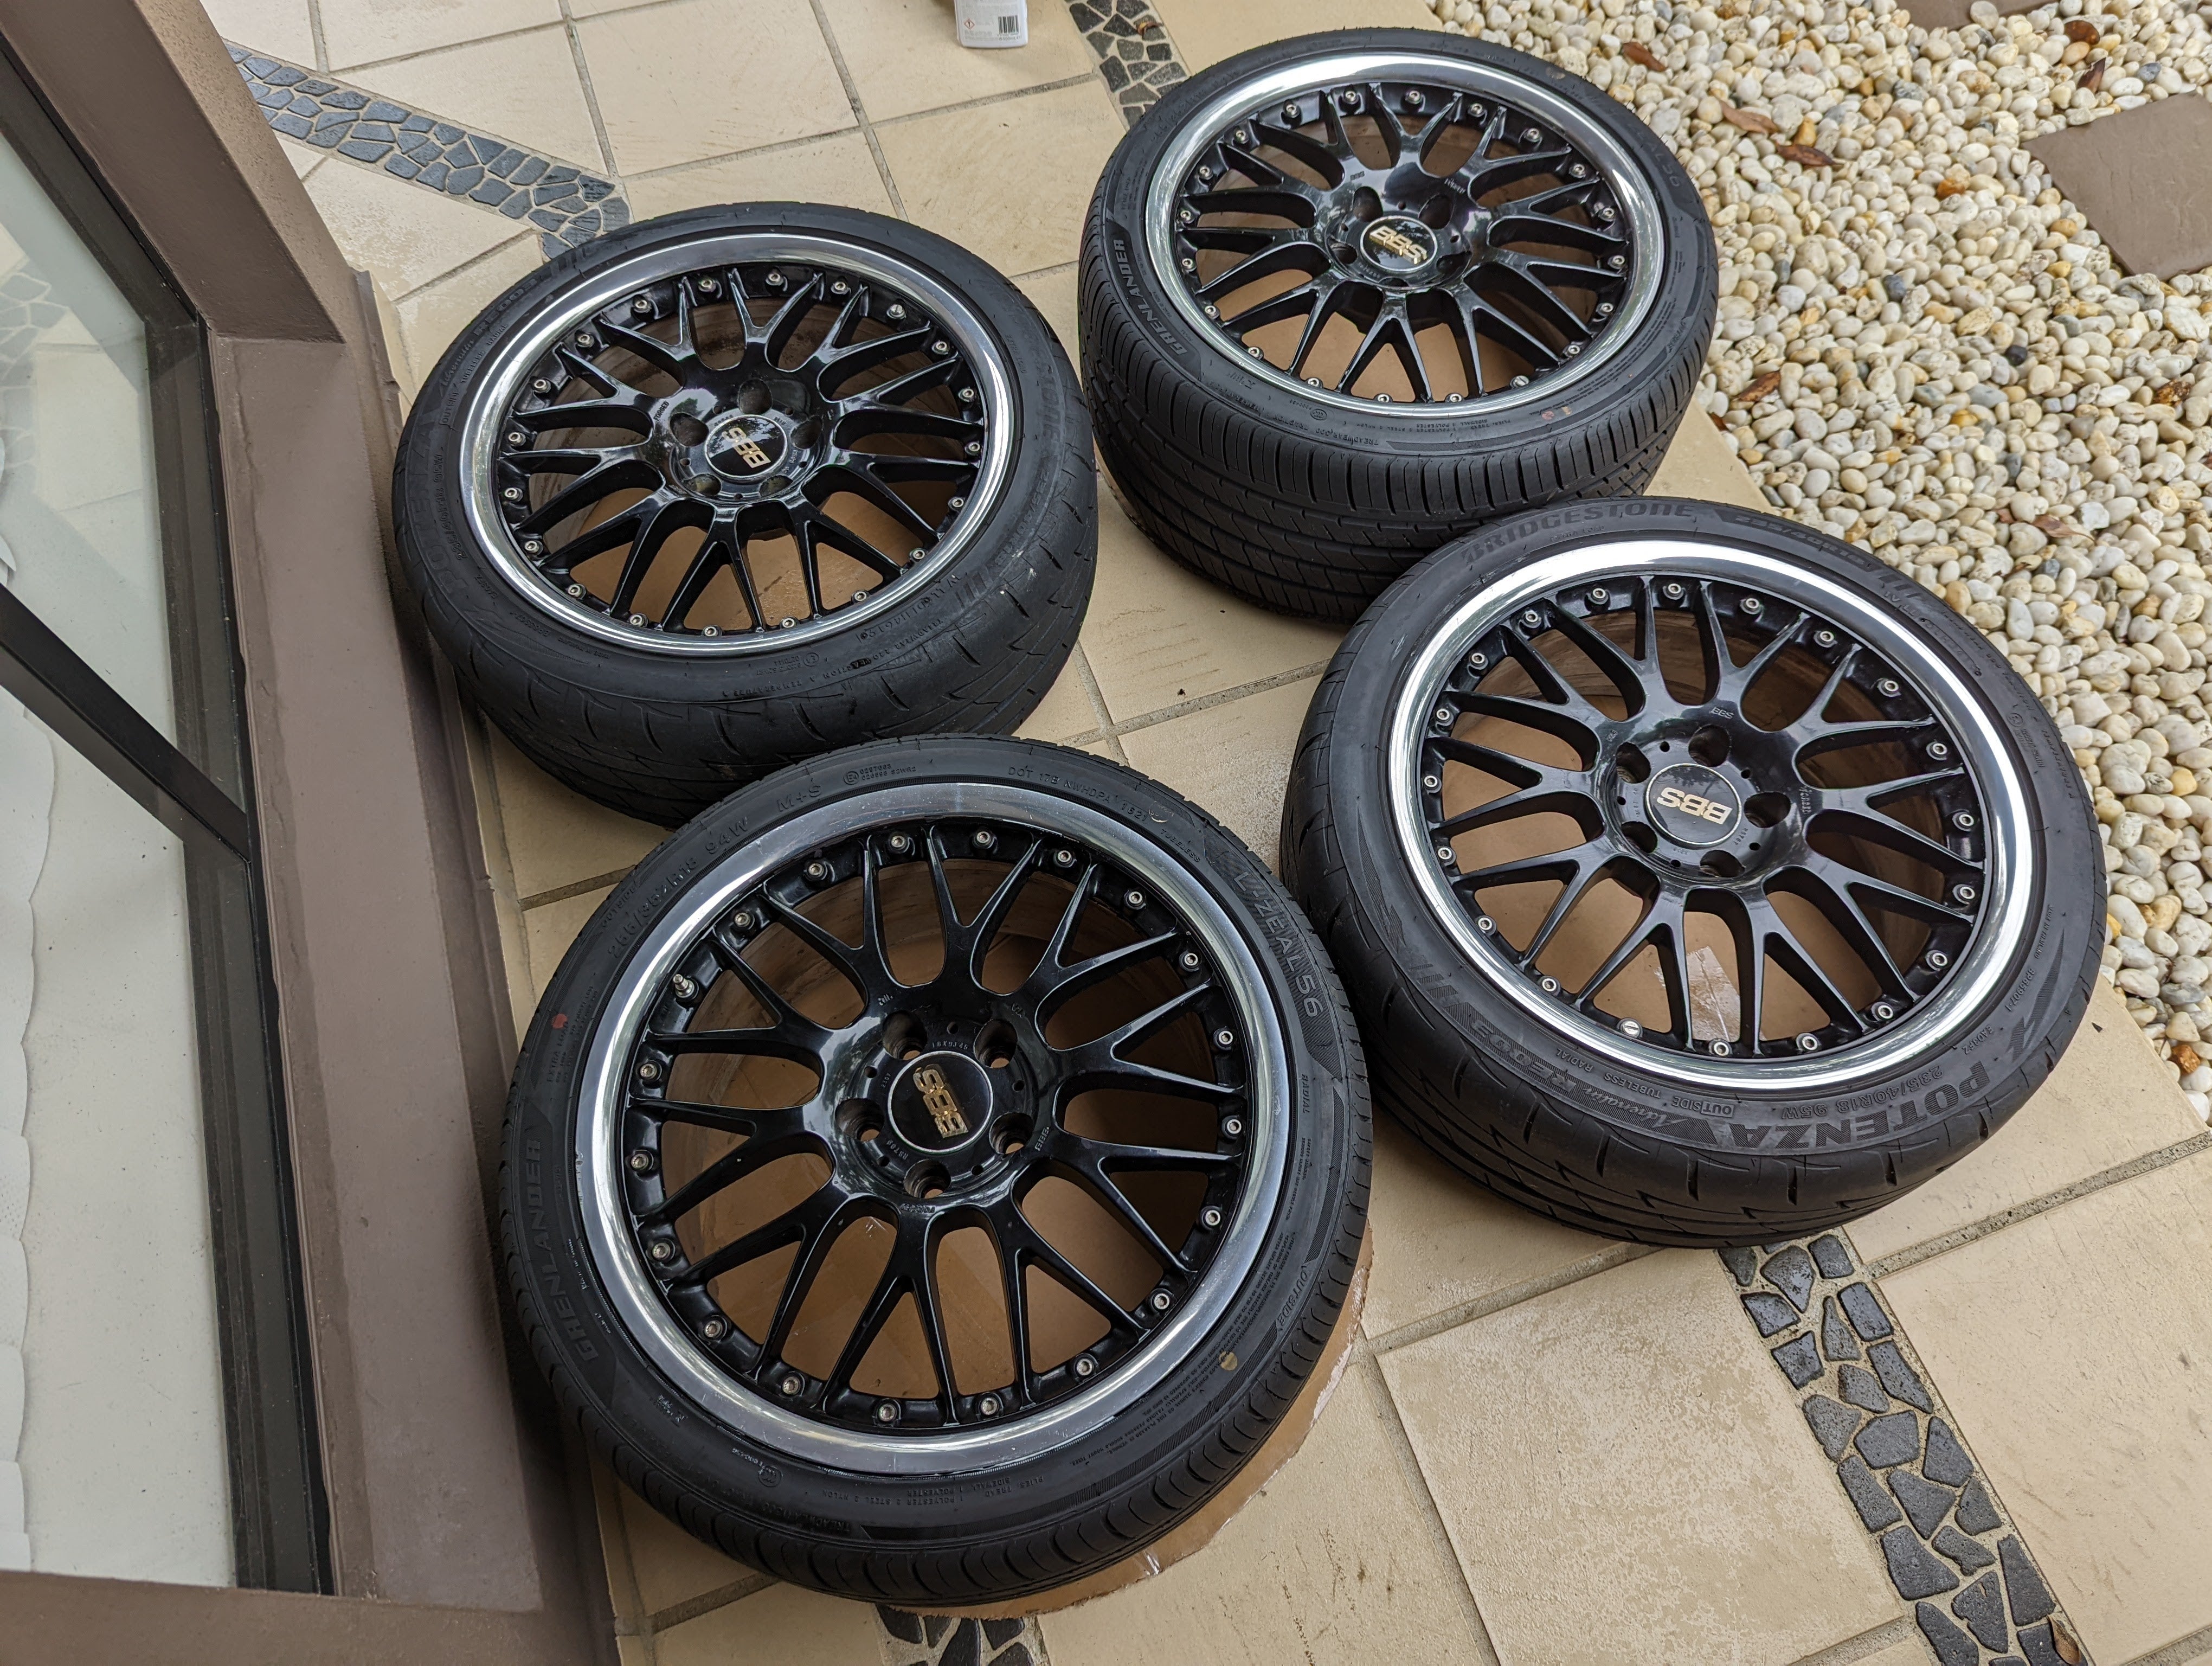 BBS Forged RS787/789 with Genuine BBS Centre Caps and Near New Tyres - 5x114.3 - F: 18x8 +40 - R: 18x9 +45